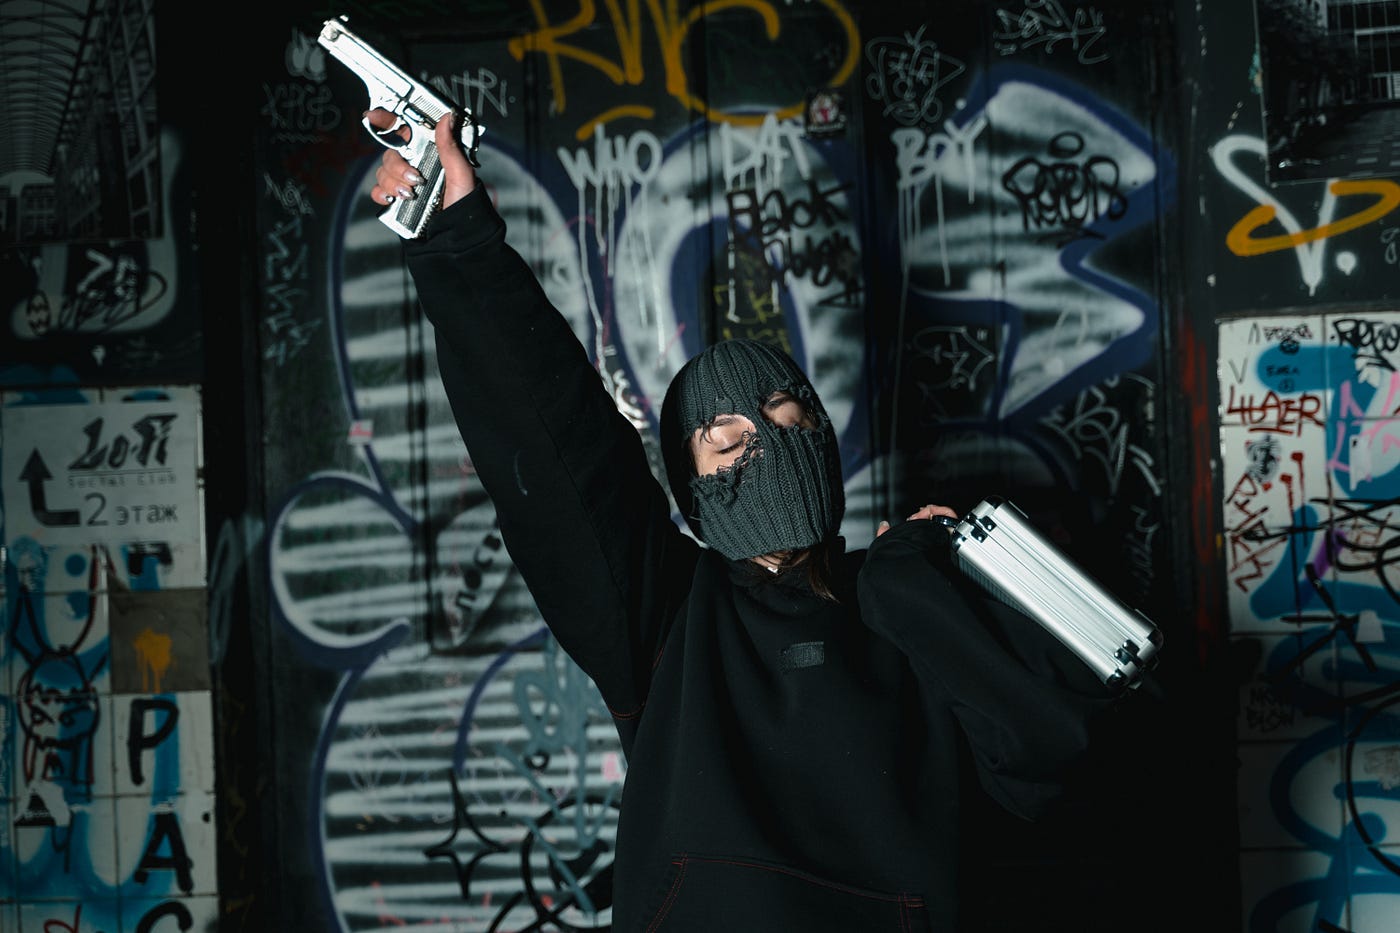 A woman wearing a balaclava and pointing a gun up, with a suitcase in her hand. There is graffiti in the background.